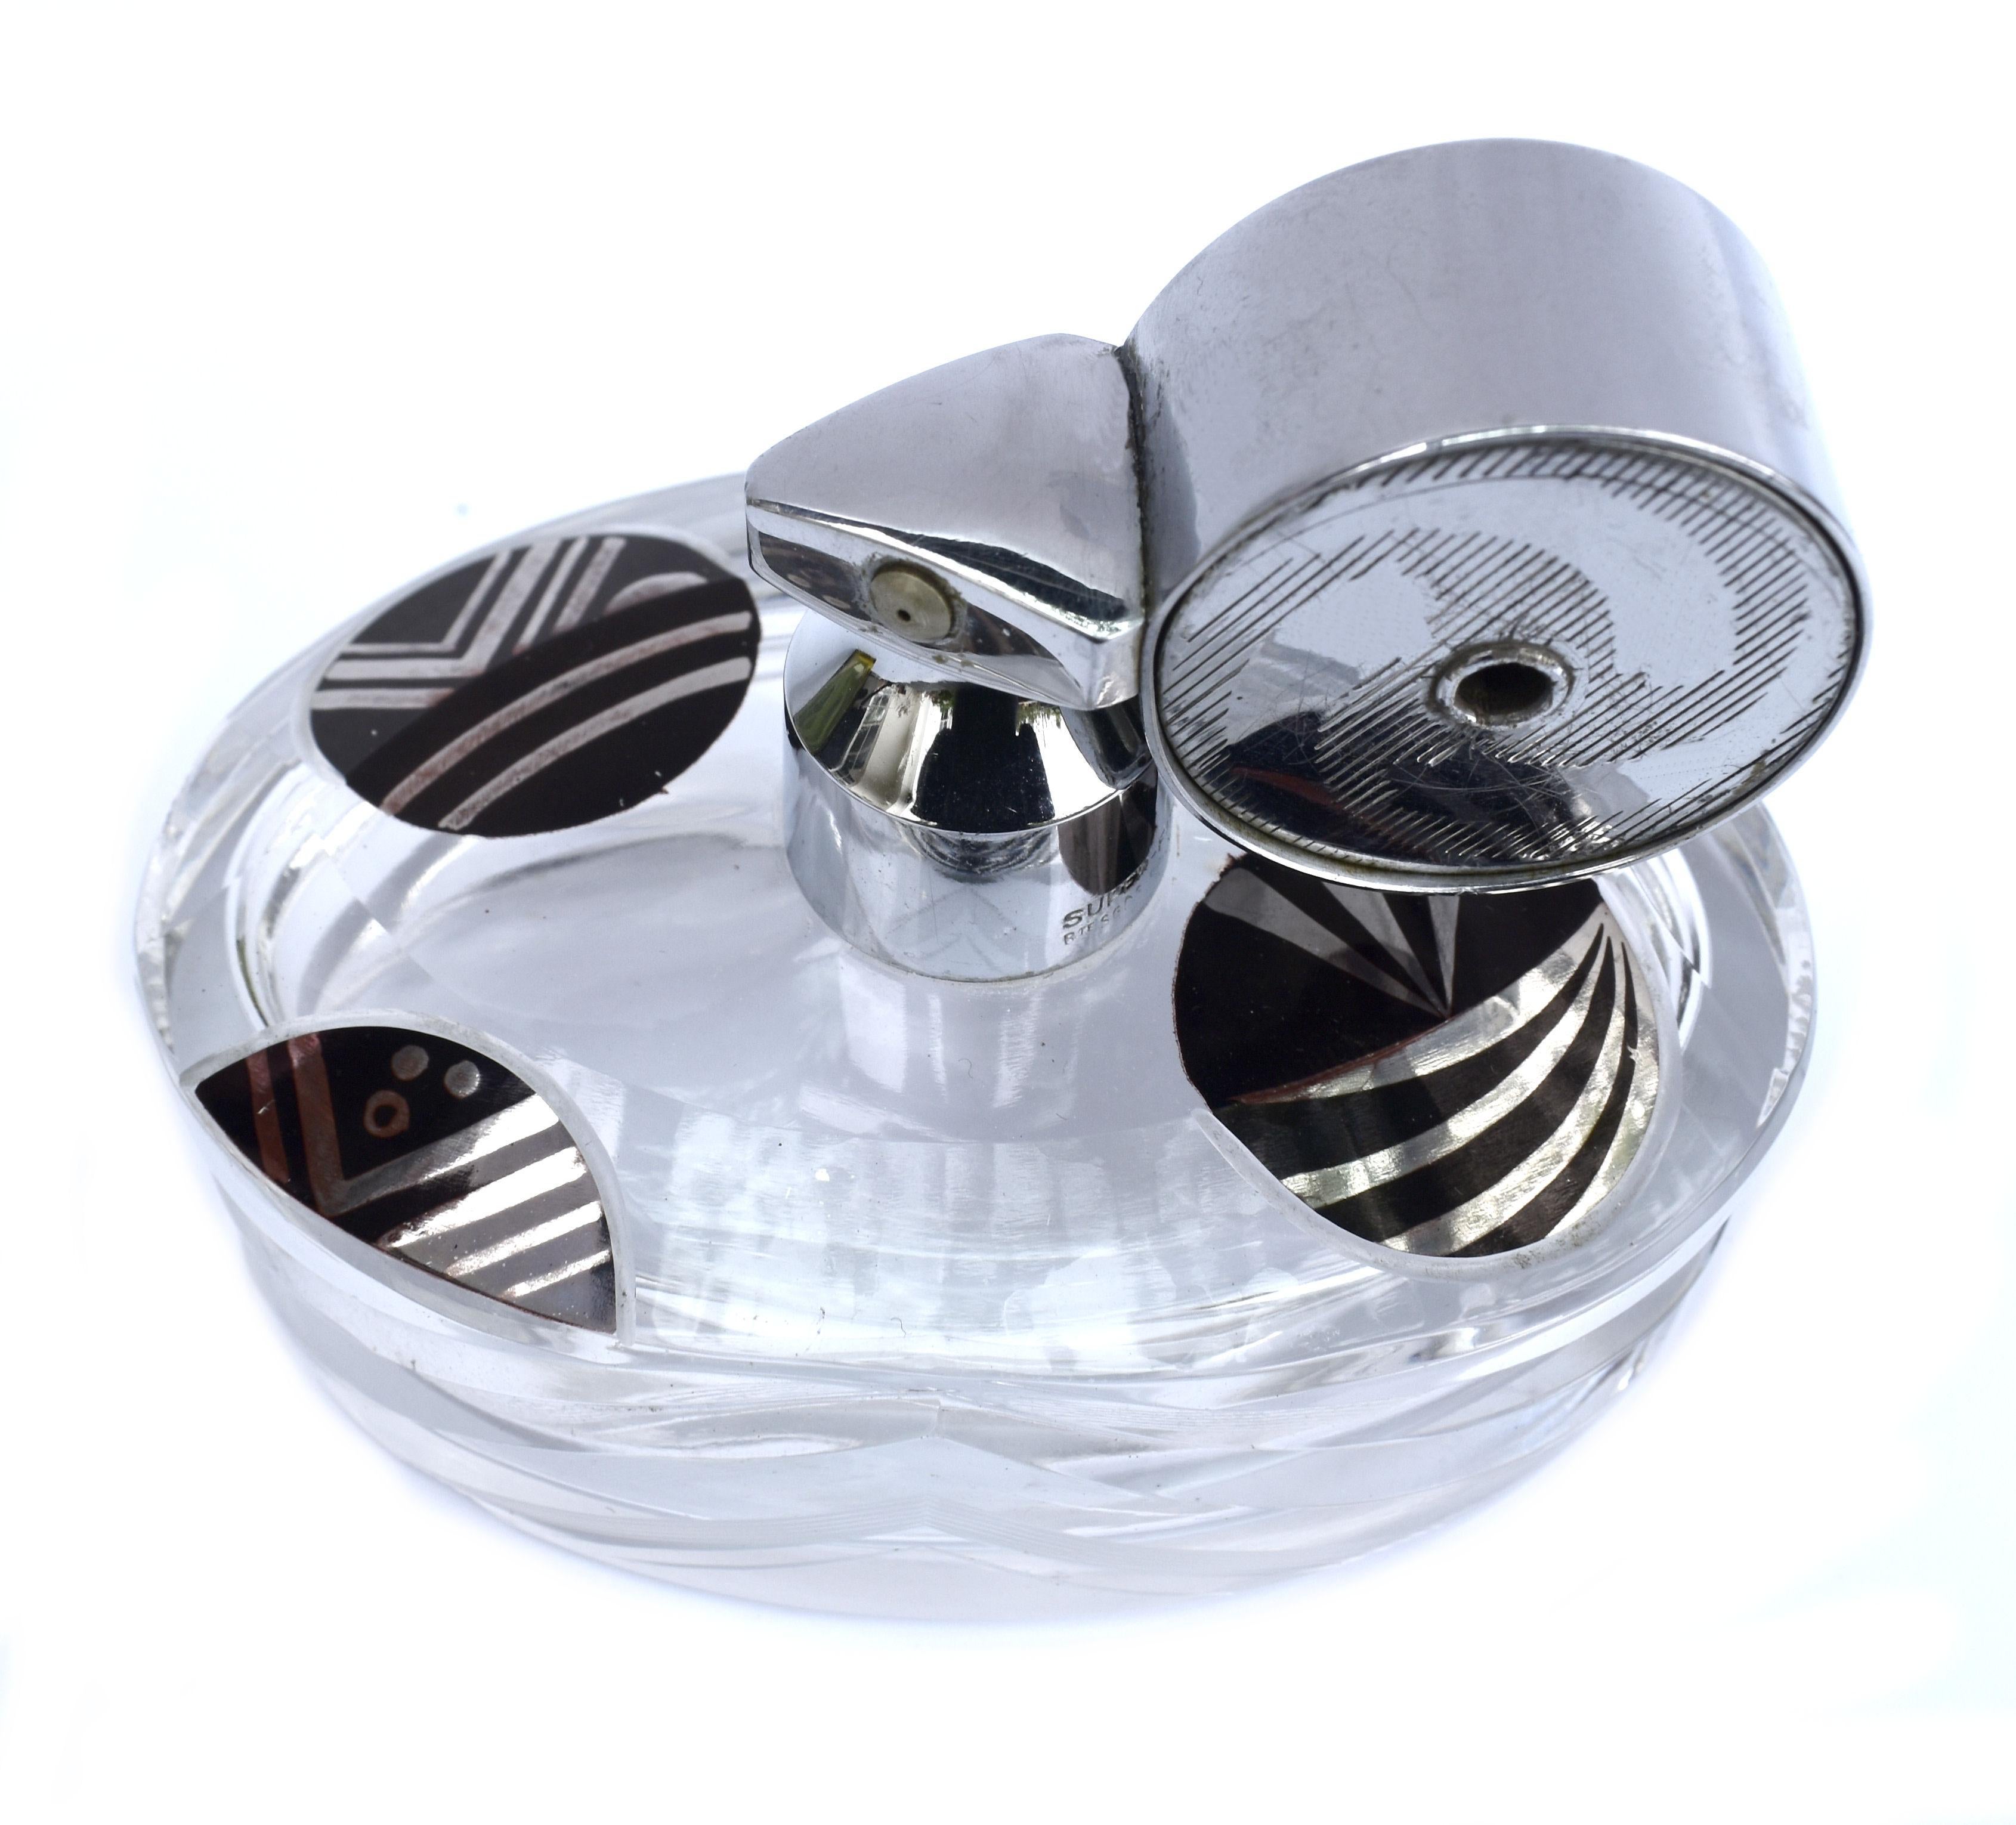 A truly beautiful Art Deco crystal glass and chrome atomiser dating to the 1930’s very much in the style of Karl Palda. Everything works as it should and is present and undamaged. All original and perfect vanity piece for both the collector and gift